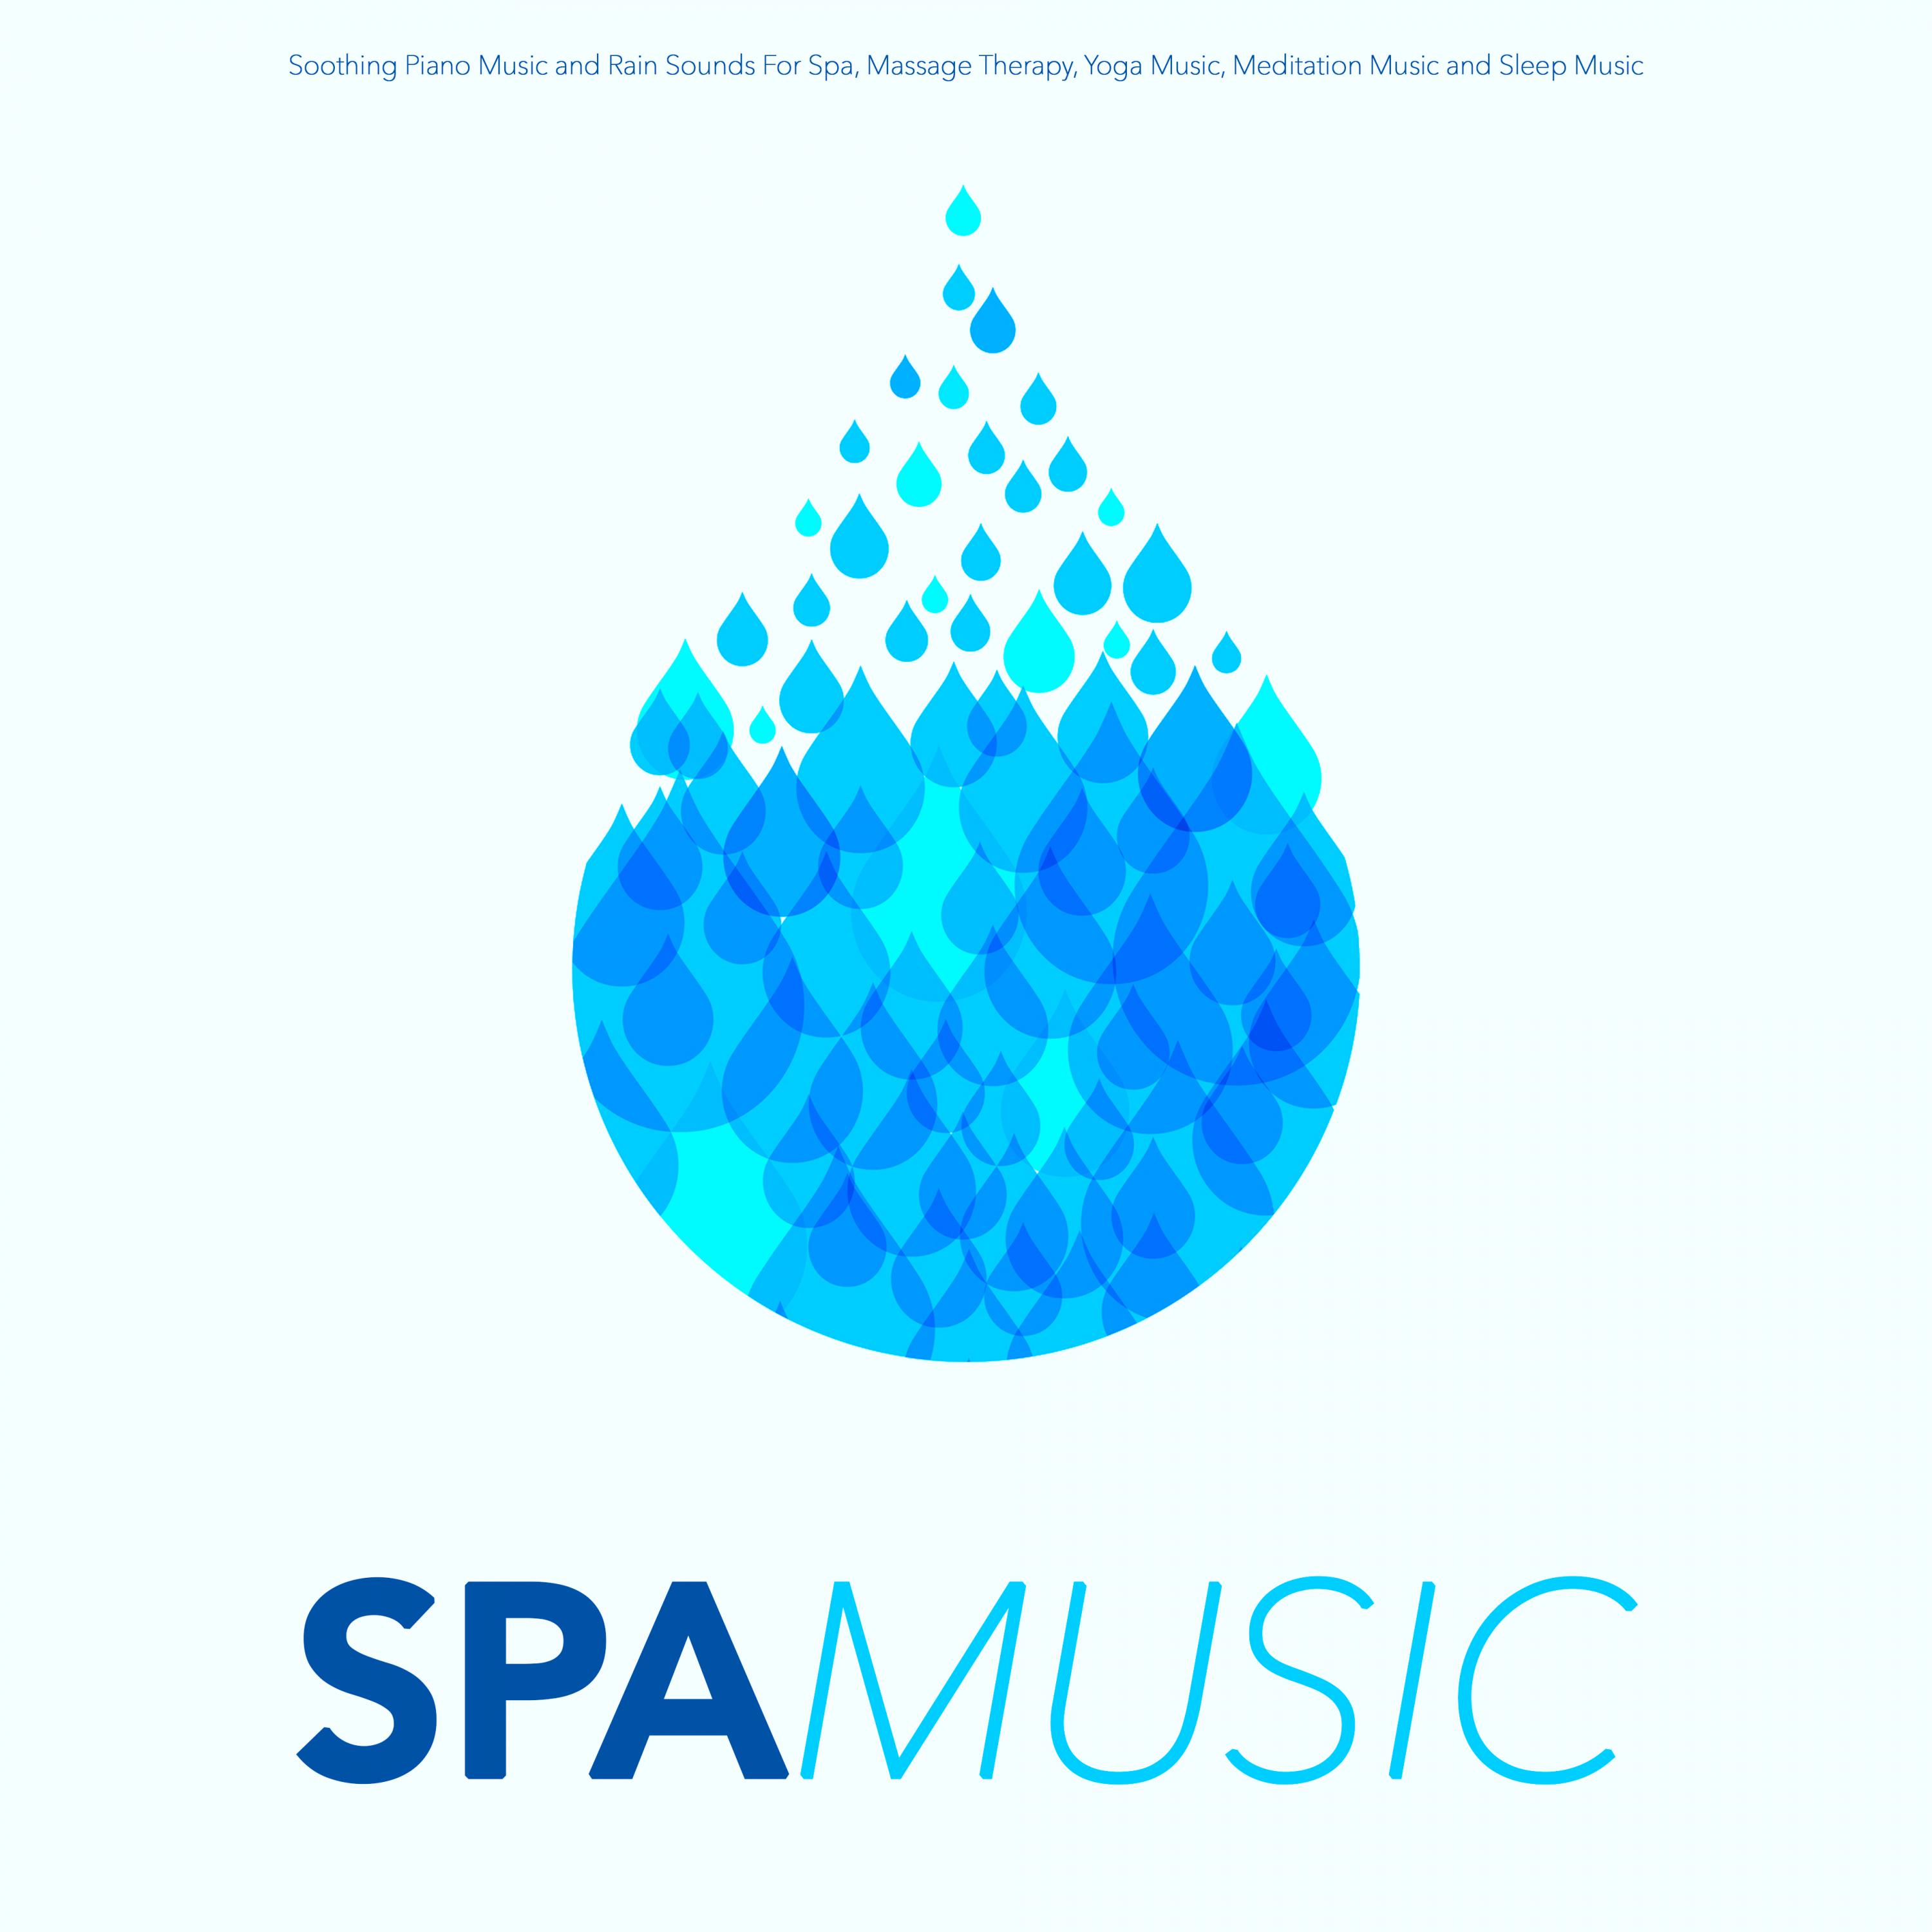 Rain Sounds For Relaxing Spa